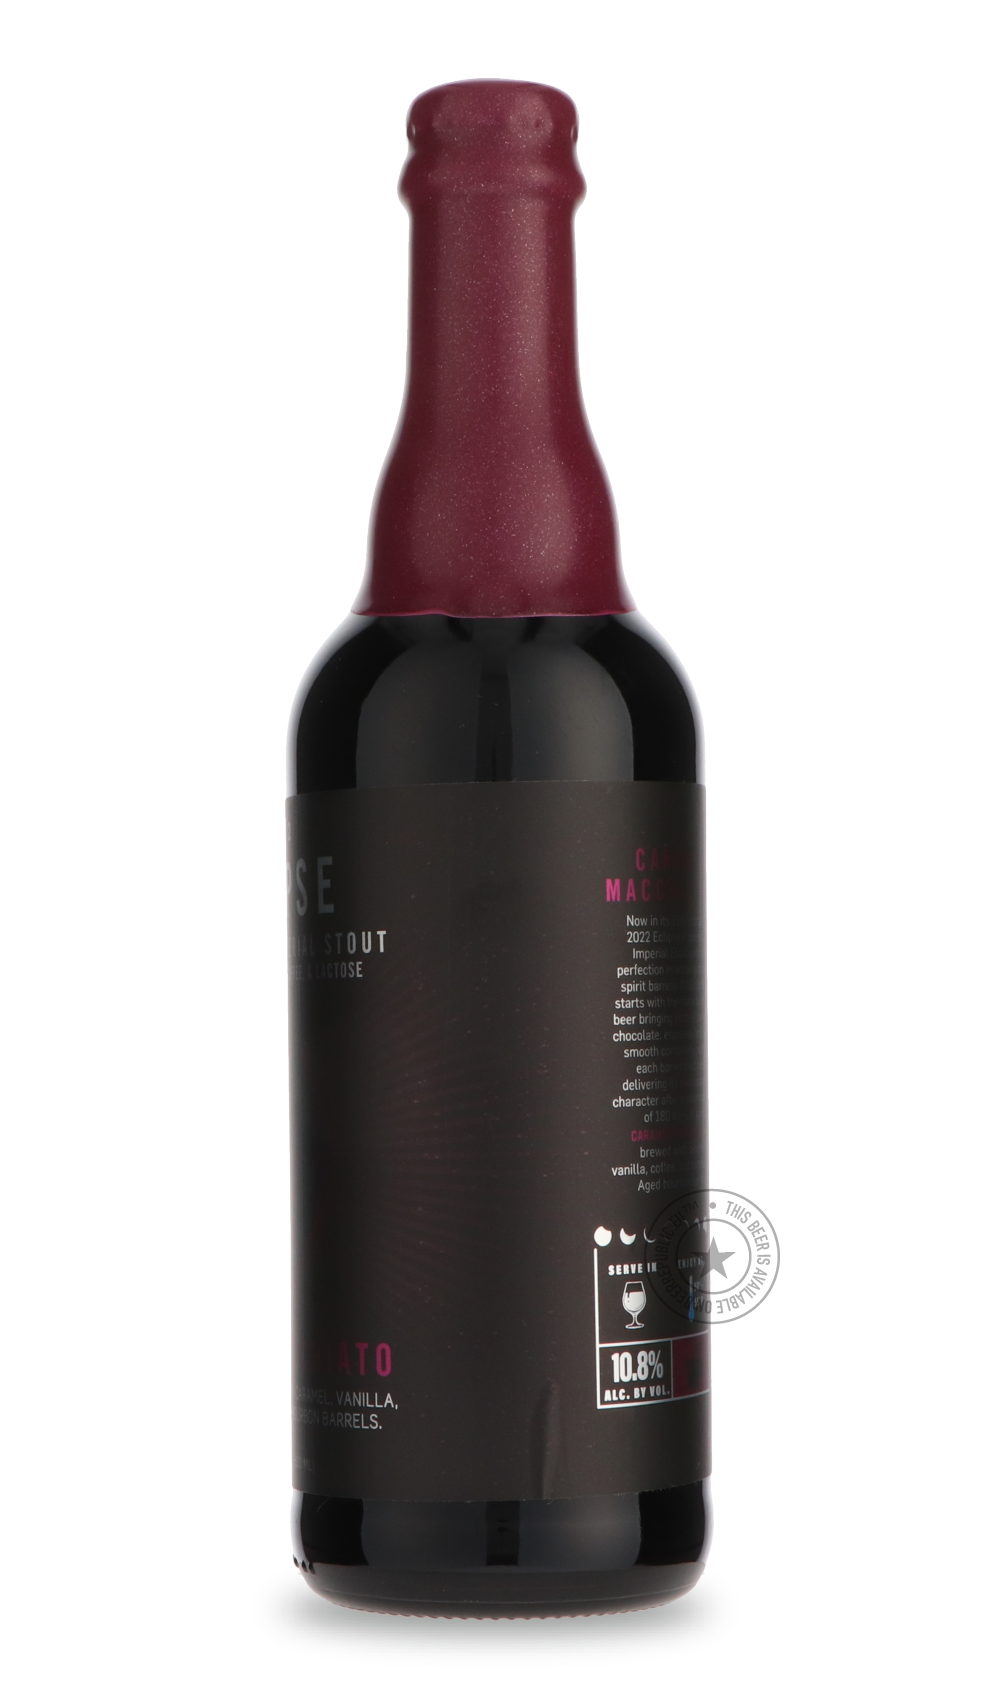 -FiftyFifty- Eclipse - Caramel Macchiato (2022)-Stout & Porter- Only @ Beer Republic - The best online beer store for American & Canadian craft beer - Buy beer online from the USA and Canada - Bier online kopen - Amerikaans bier kopen - Craft beer store - Craft beer kopen - Amerikanisch bier kaufen - Bier online kaufen - Acheter biere online - IPA - Stout - Porter - New England IPA - Hazy IPA - Imperial Stout - Barrel Aged - Barrel Aged Imperial Stout - Brown - Dark beer - Blond - Blonde - Pilsner - Lager -